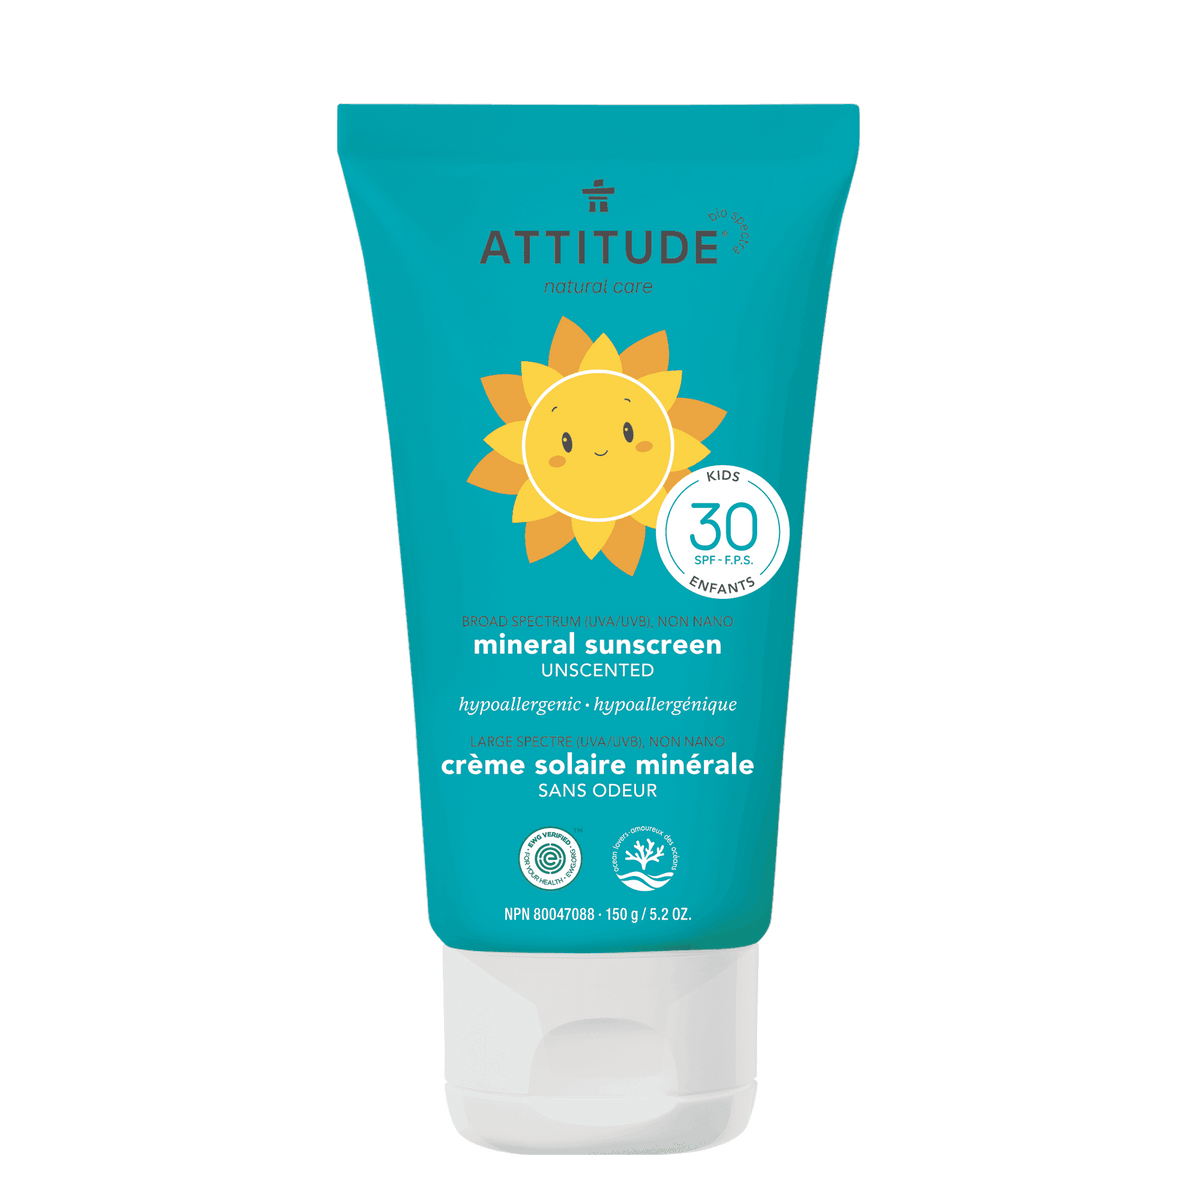 Baby & Kids Moisturizer Mineral Sunscreen : SPF 30 - Unscented / 150g (5,2 OZ.) - ProCare Outlet by Attitude